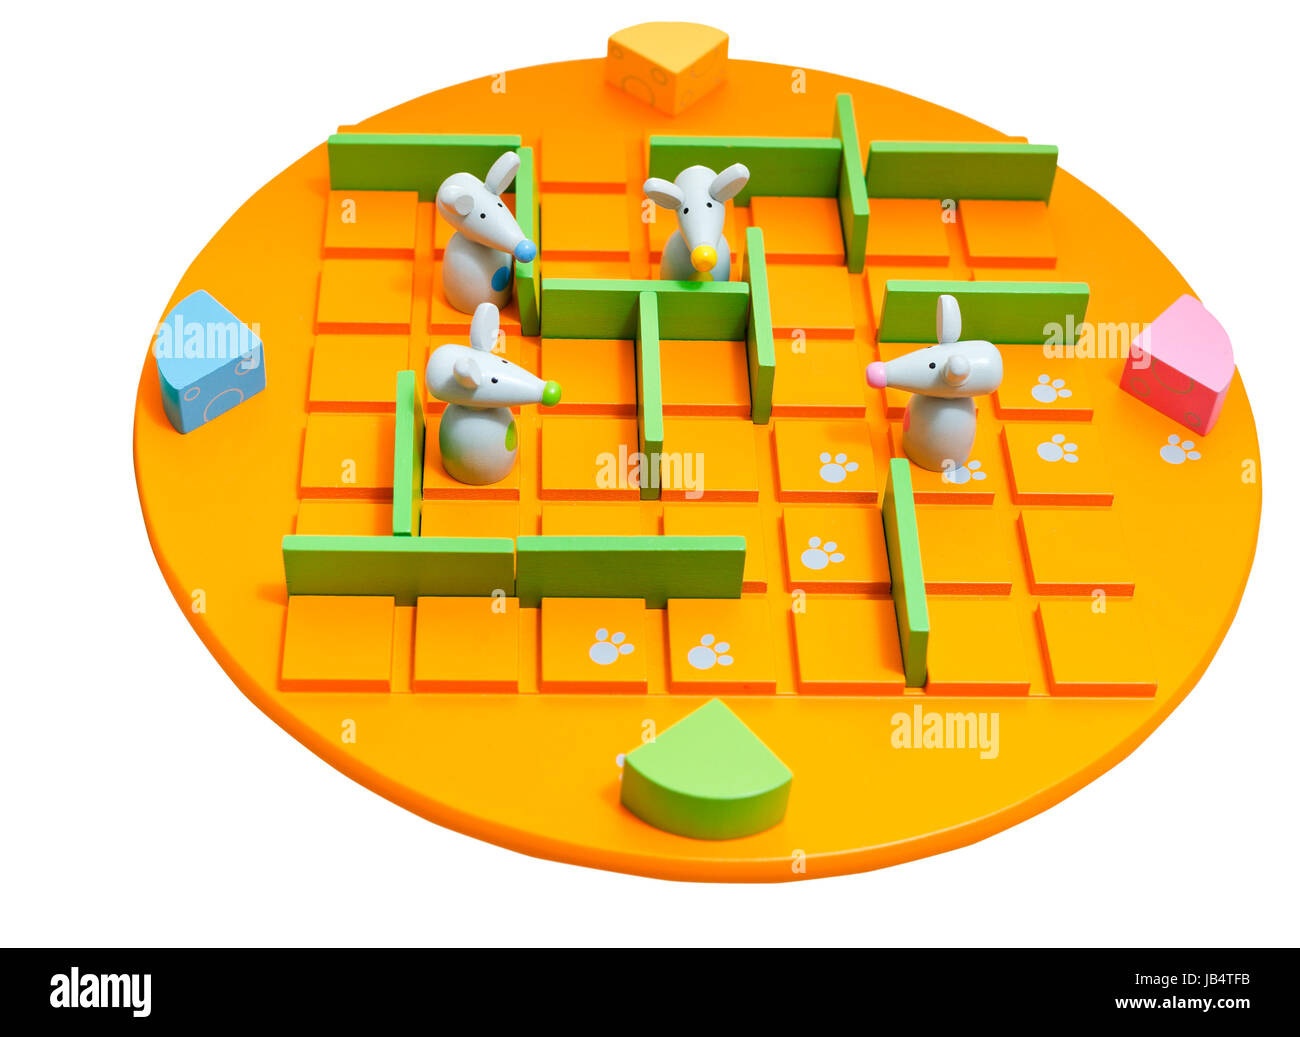 MOSCOW, RUSSIA - FEBRUARY 3, 2014: boardgame Quoridor Kid on white. Quoridor game was designed by Mirko Marchesi, received Mensa Mind Game award in 1997, it was Game Of The Year in USA, France, Canada Stock Photo